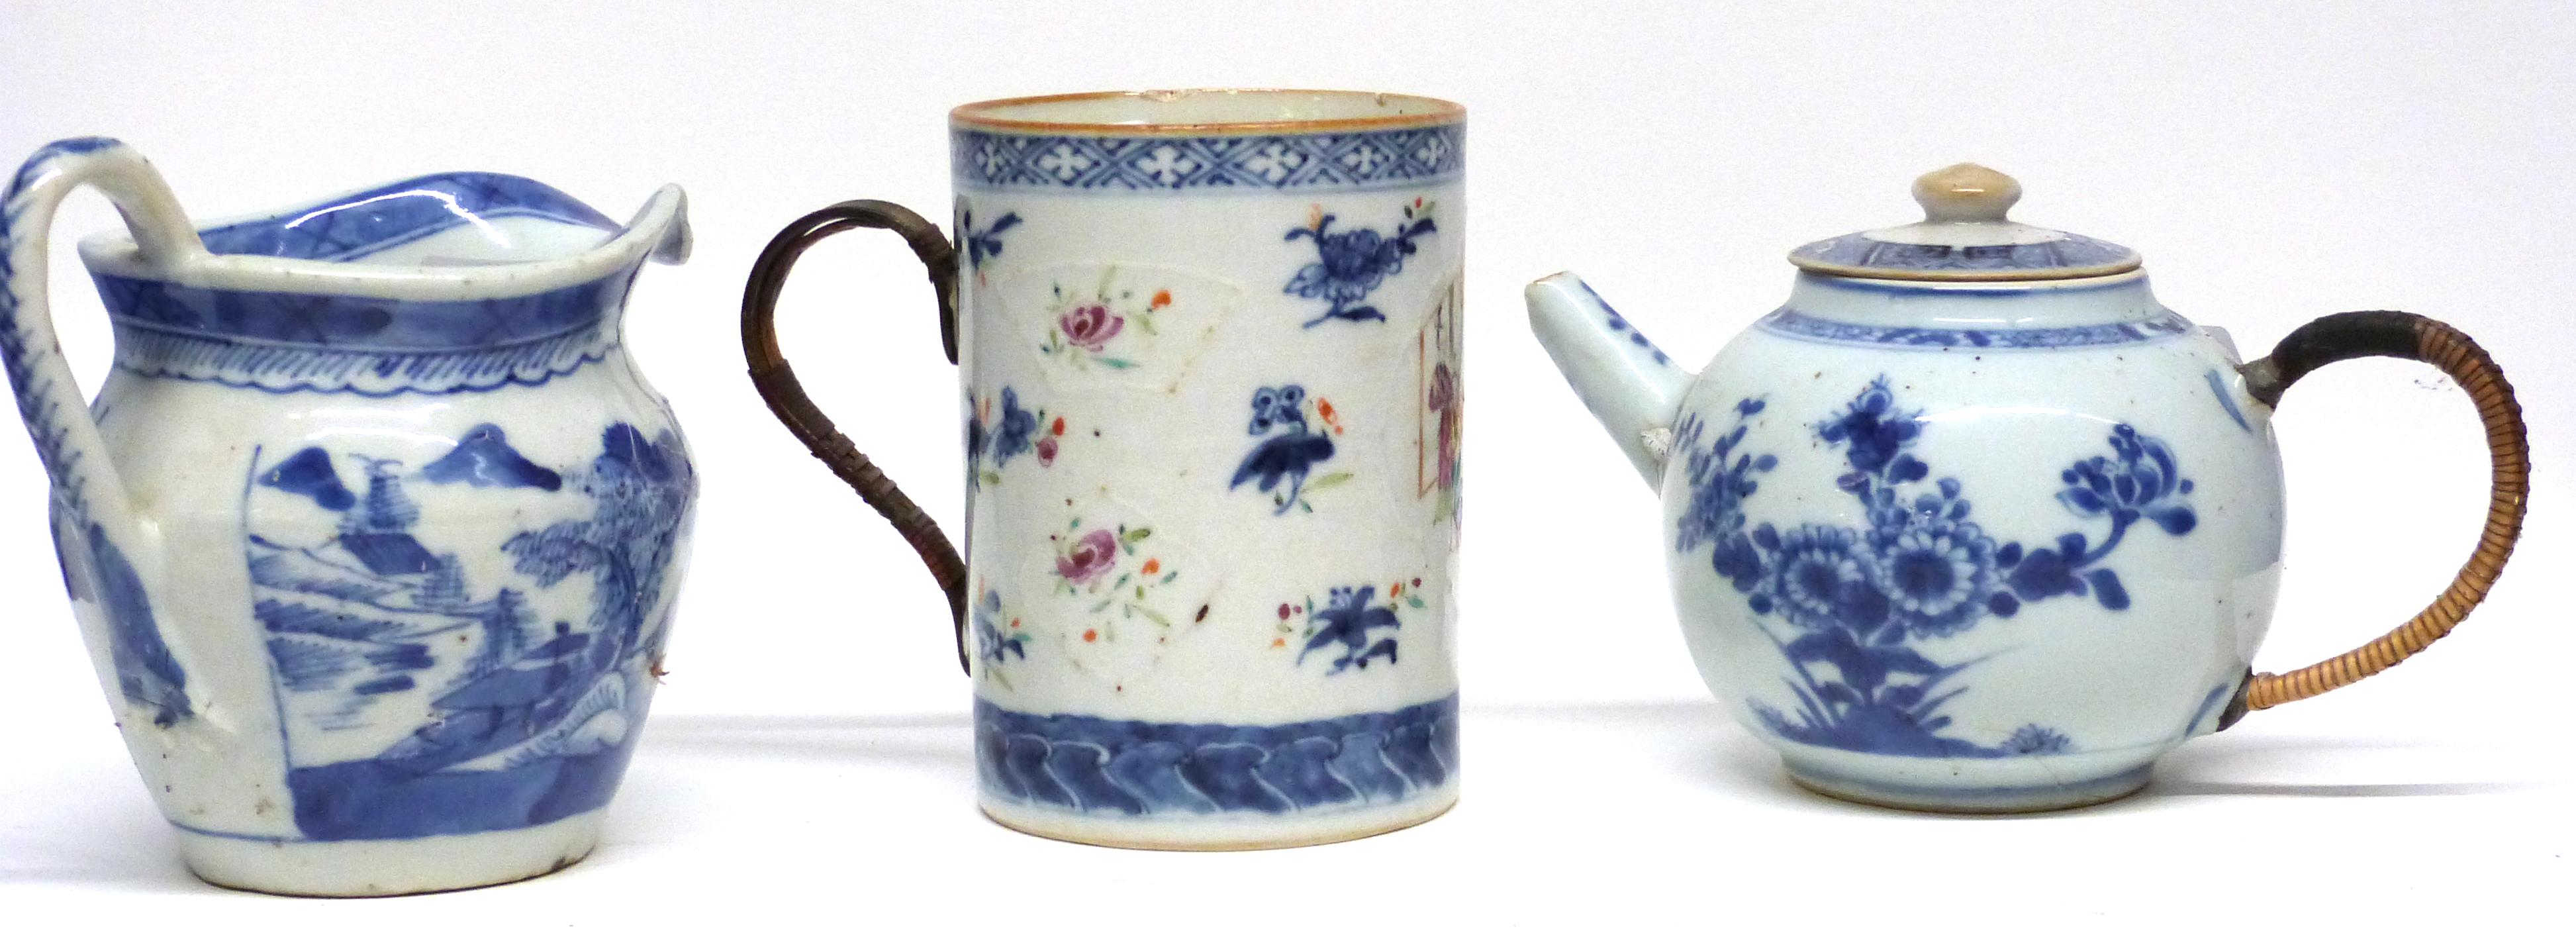 Selection of 18th/19th century Chinese porcelain including a Chinese export mug decorated in enamels